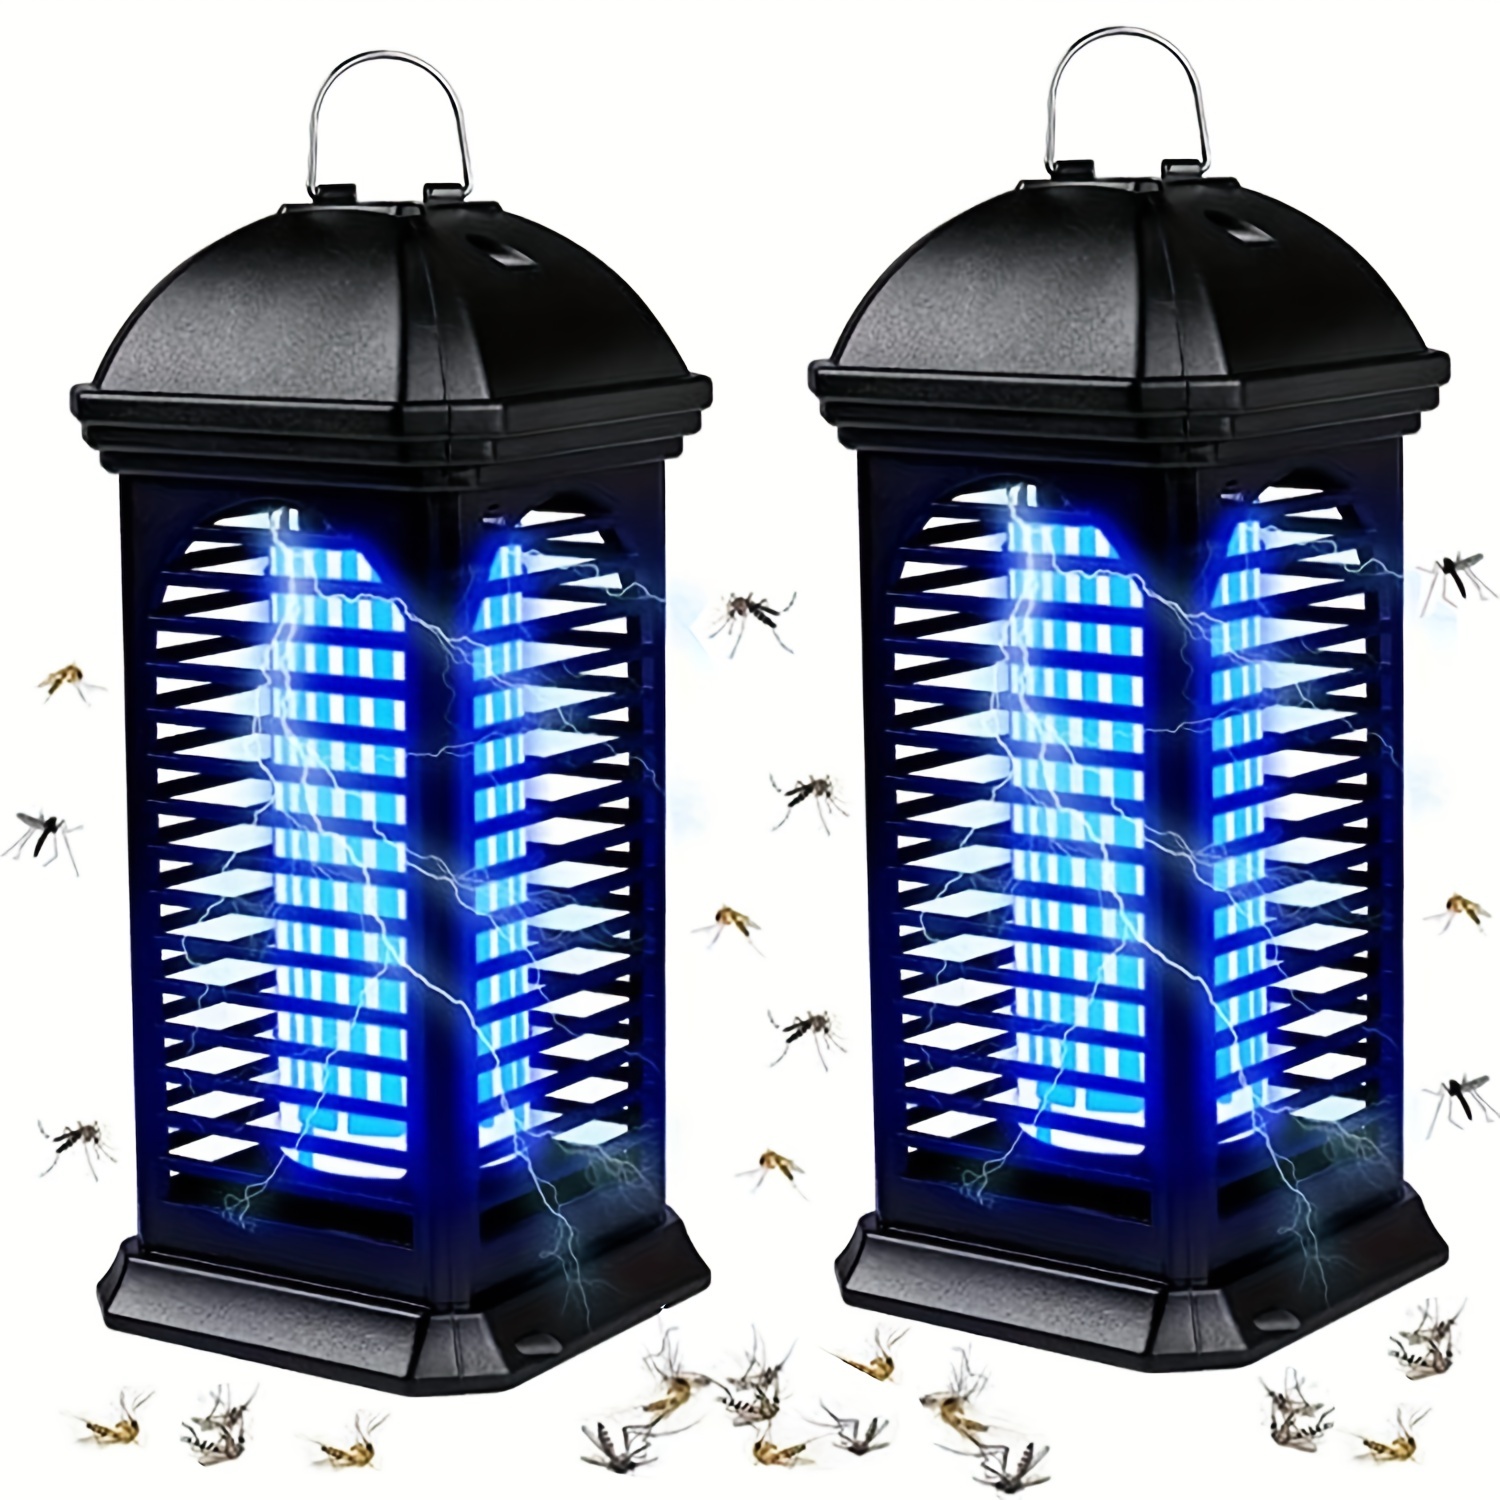 

Insect Killer, Outdoor Mosquito Killer, Outdoor Electric Insect Killer, Insect Repellent, Fly Repellent, Mosquito Killer, Suitable For Courtyard Use